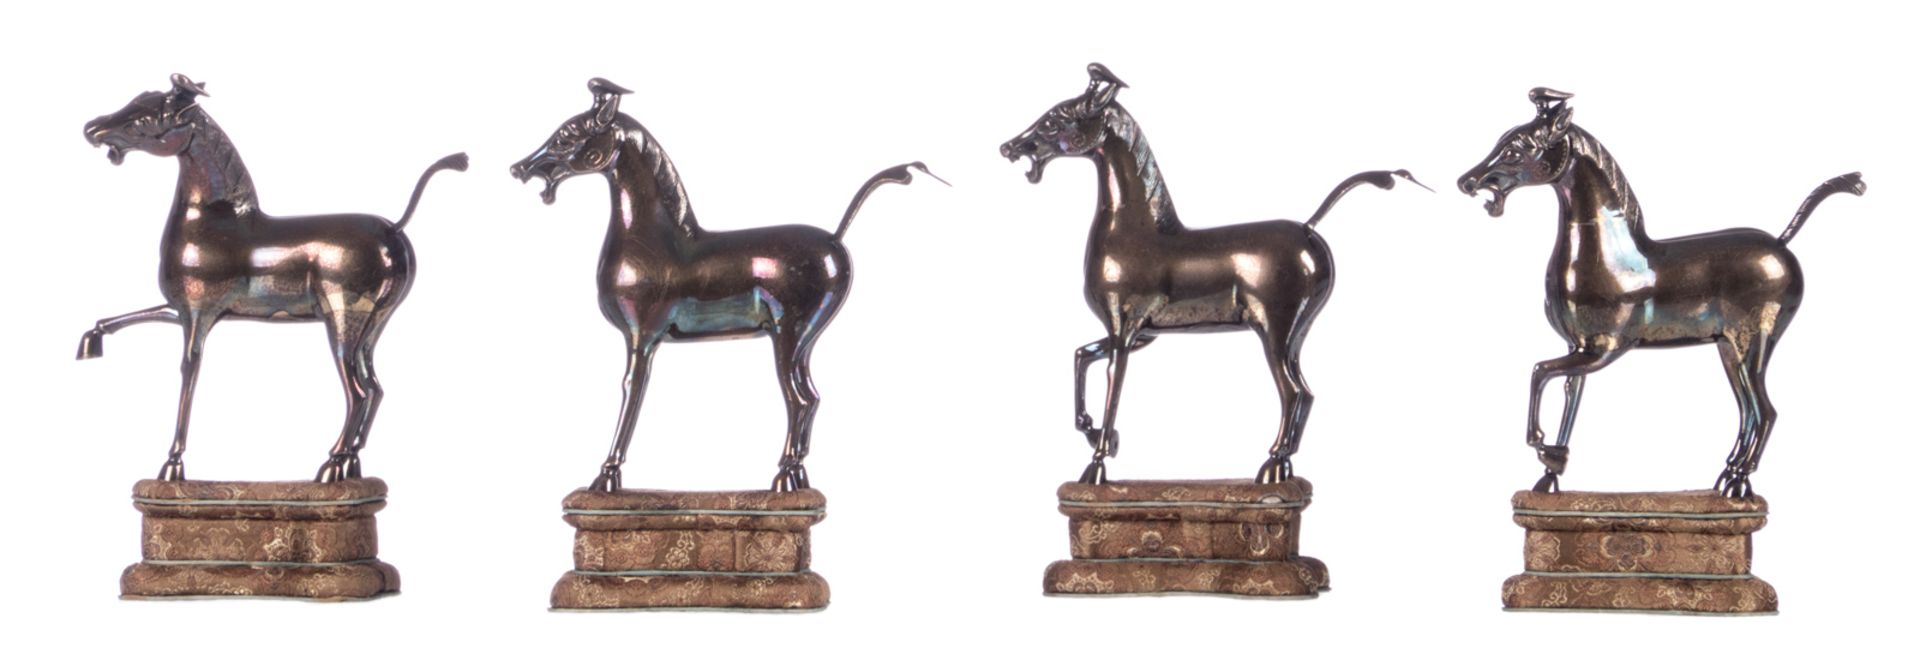 Four Chinese sterling silver horses, standing on a textile covered base, 20thC, H horses 11,4 - H